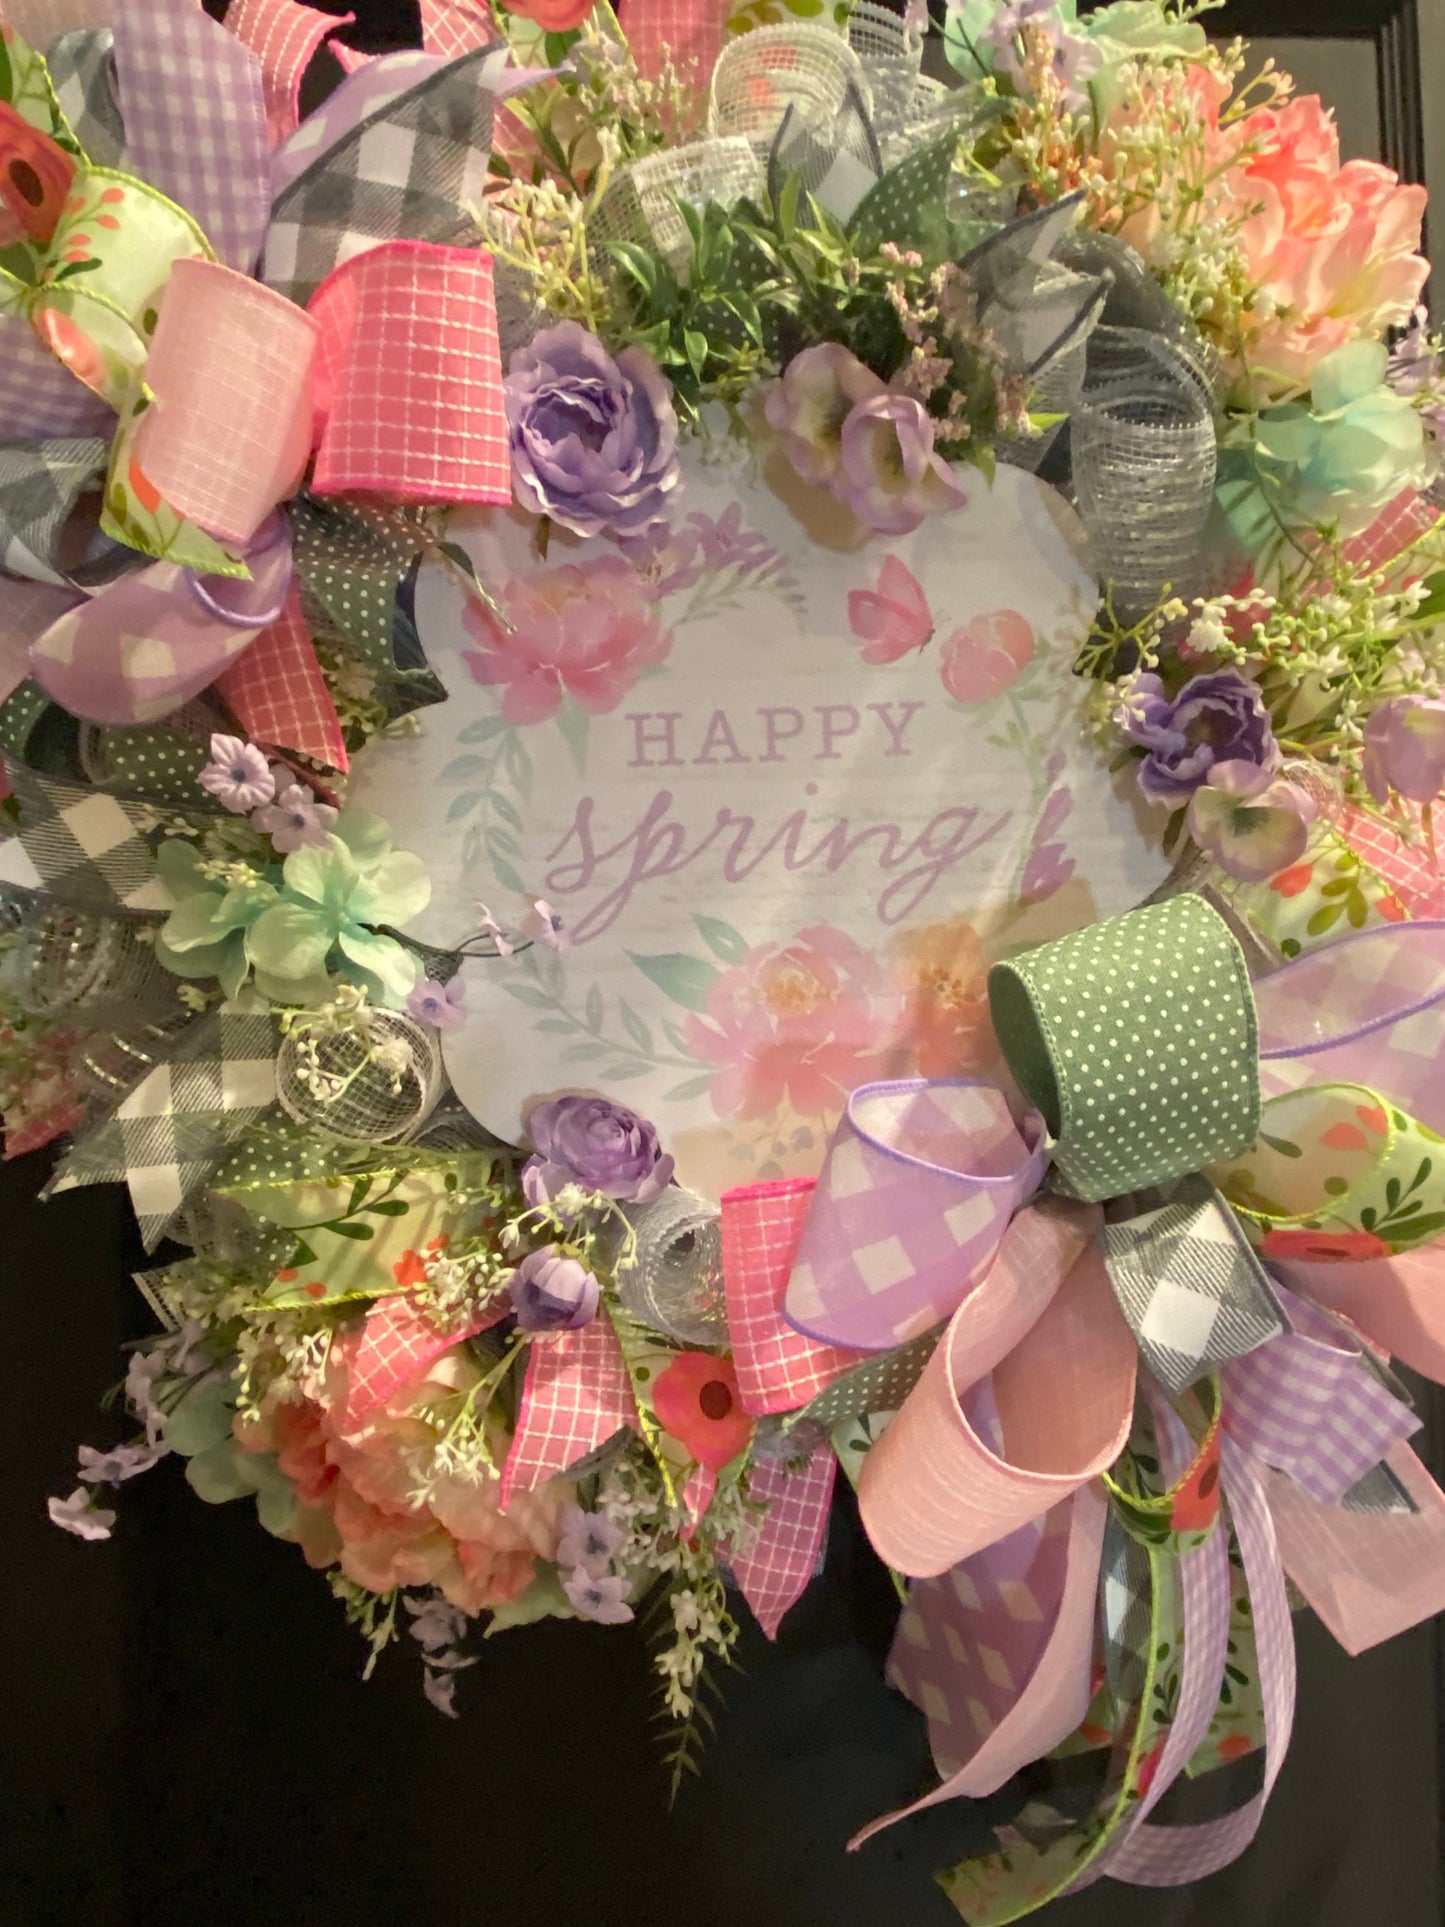 Happy Spring Floral Welcome Everyday Spring Summer Wreath